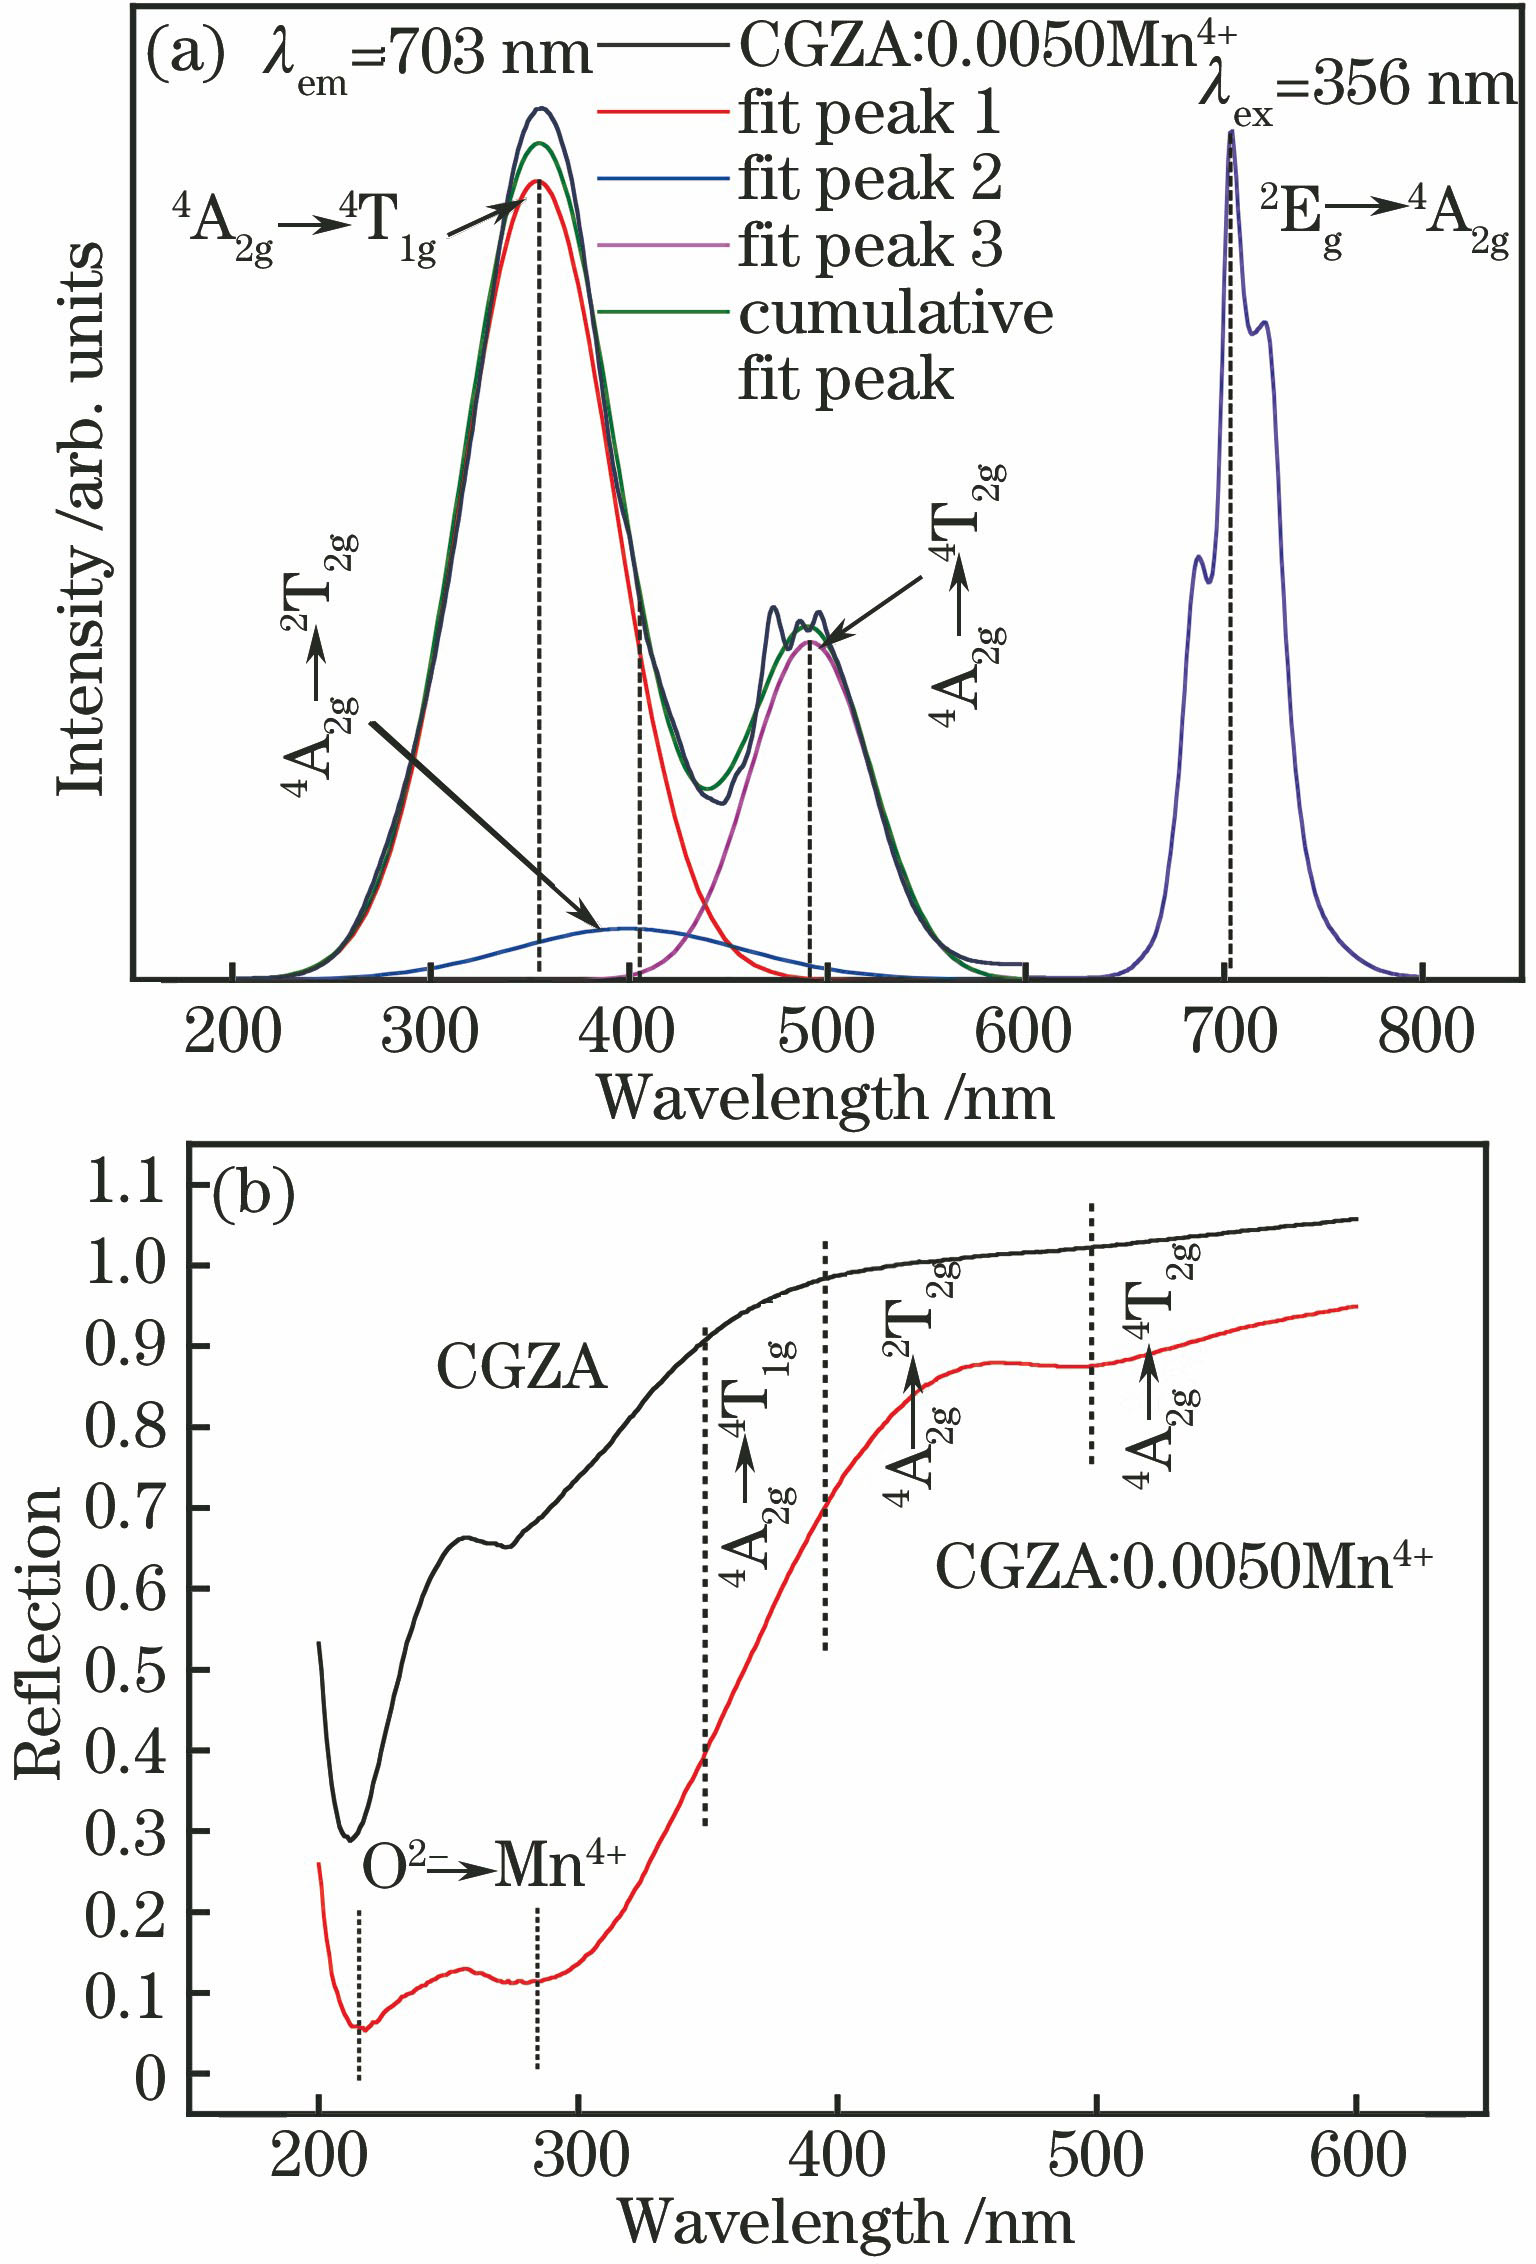 (a) Excitation and emission spectra of CGZA…0.0050Mn4+, Gaussian fitting curves and splitting peaks; (b) diffuse reflectance spectra of CGZA and CGZA…0.0050Mn4+